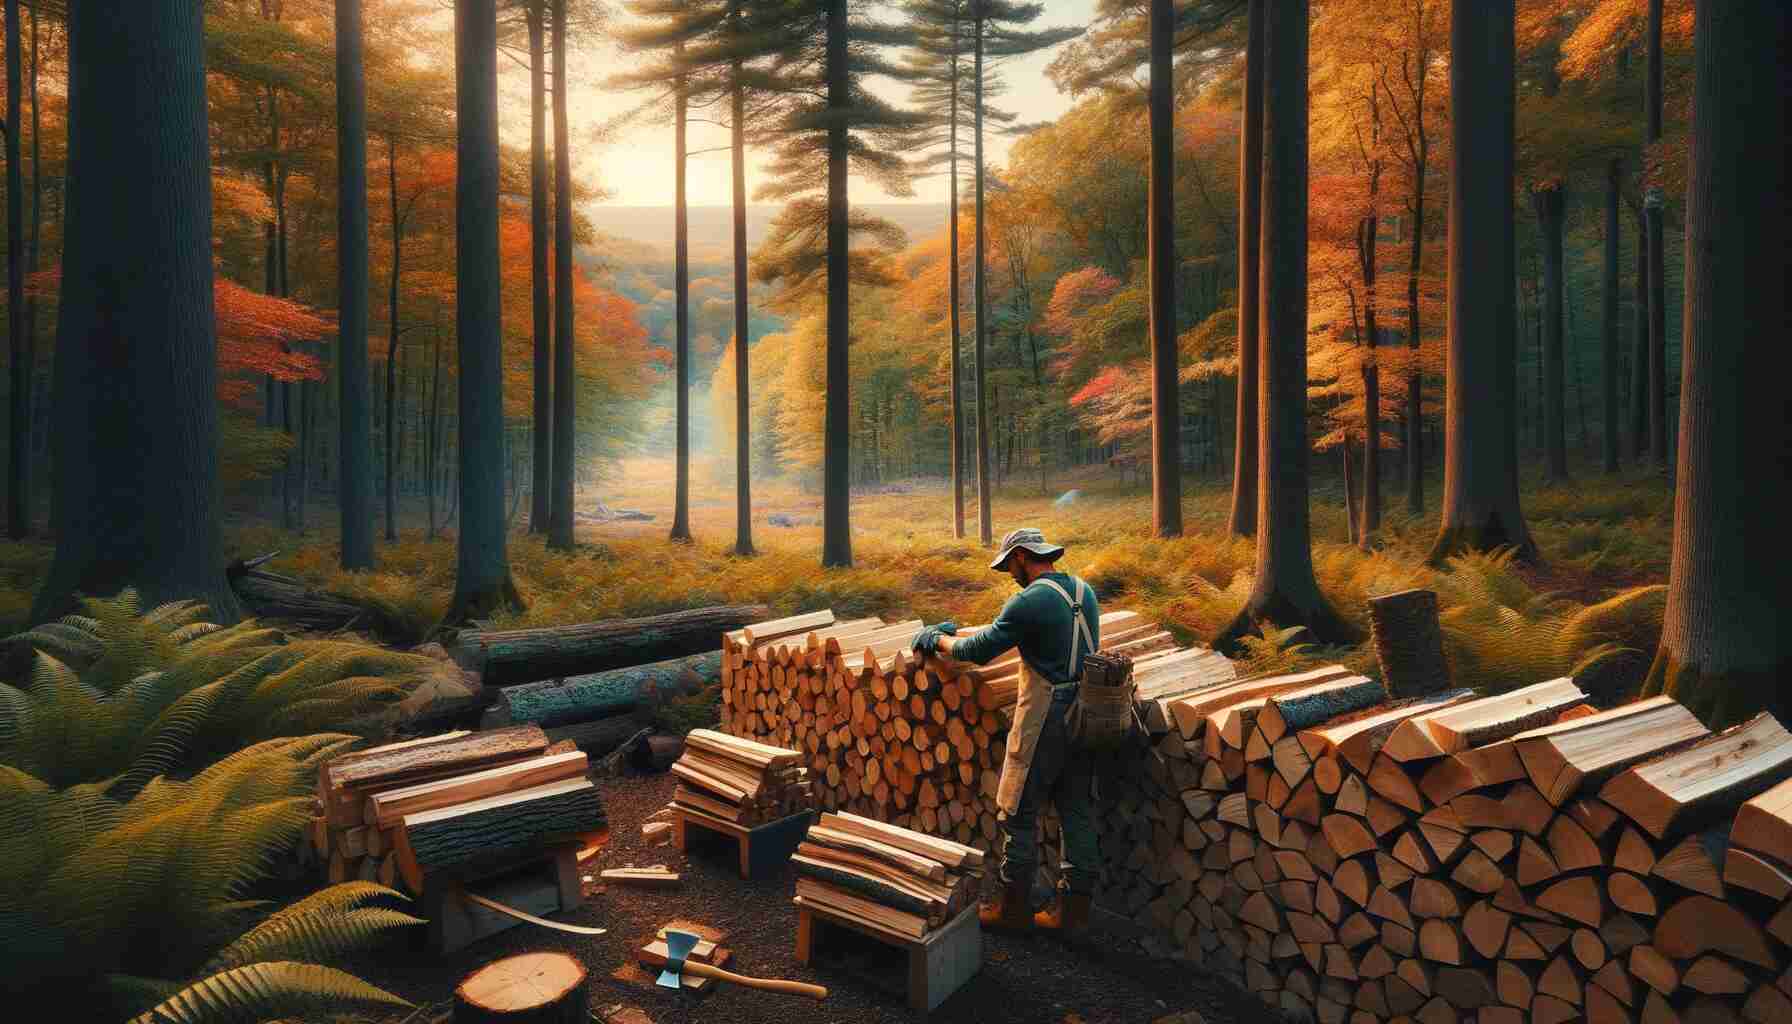 Person selecting the best firewood in a tranquil New Jersey forest during autumn, with colorful trees and warm late afternoon light.